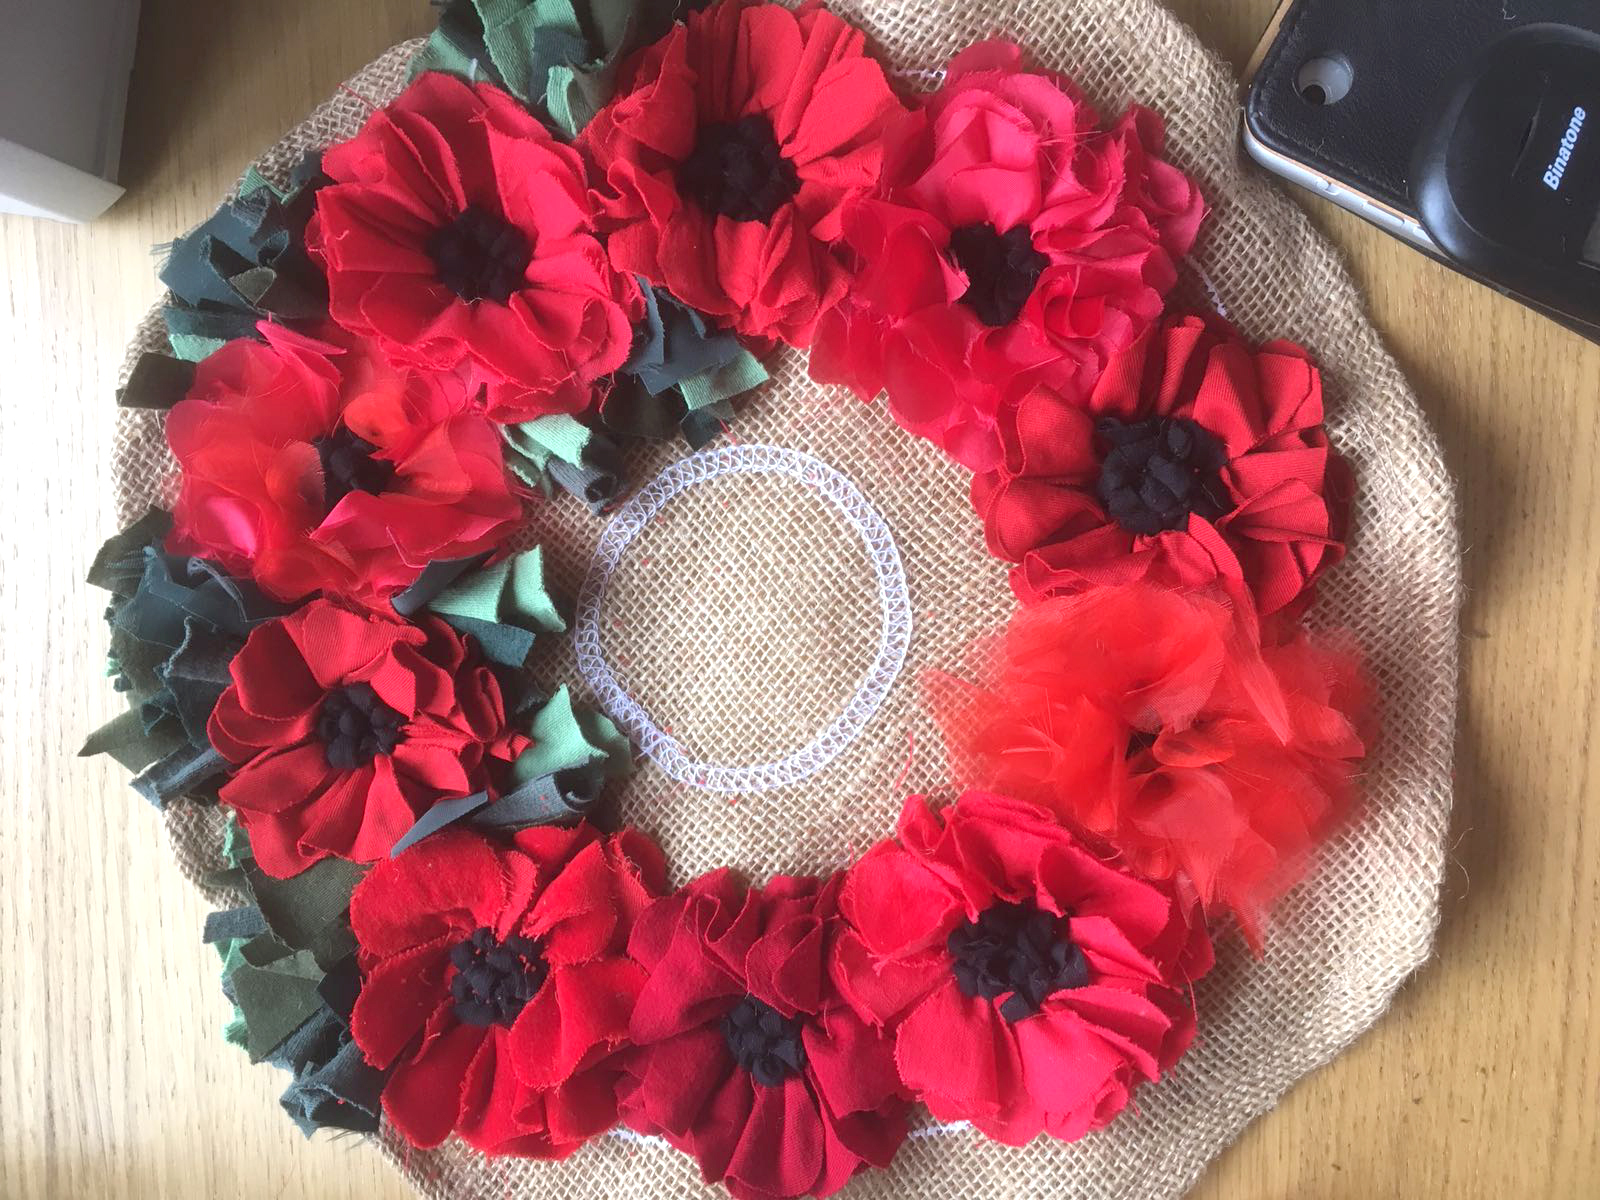 WWI centenary handmade poppy wreath for Remembrance Day